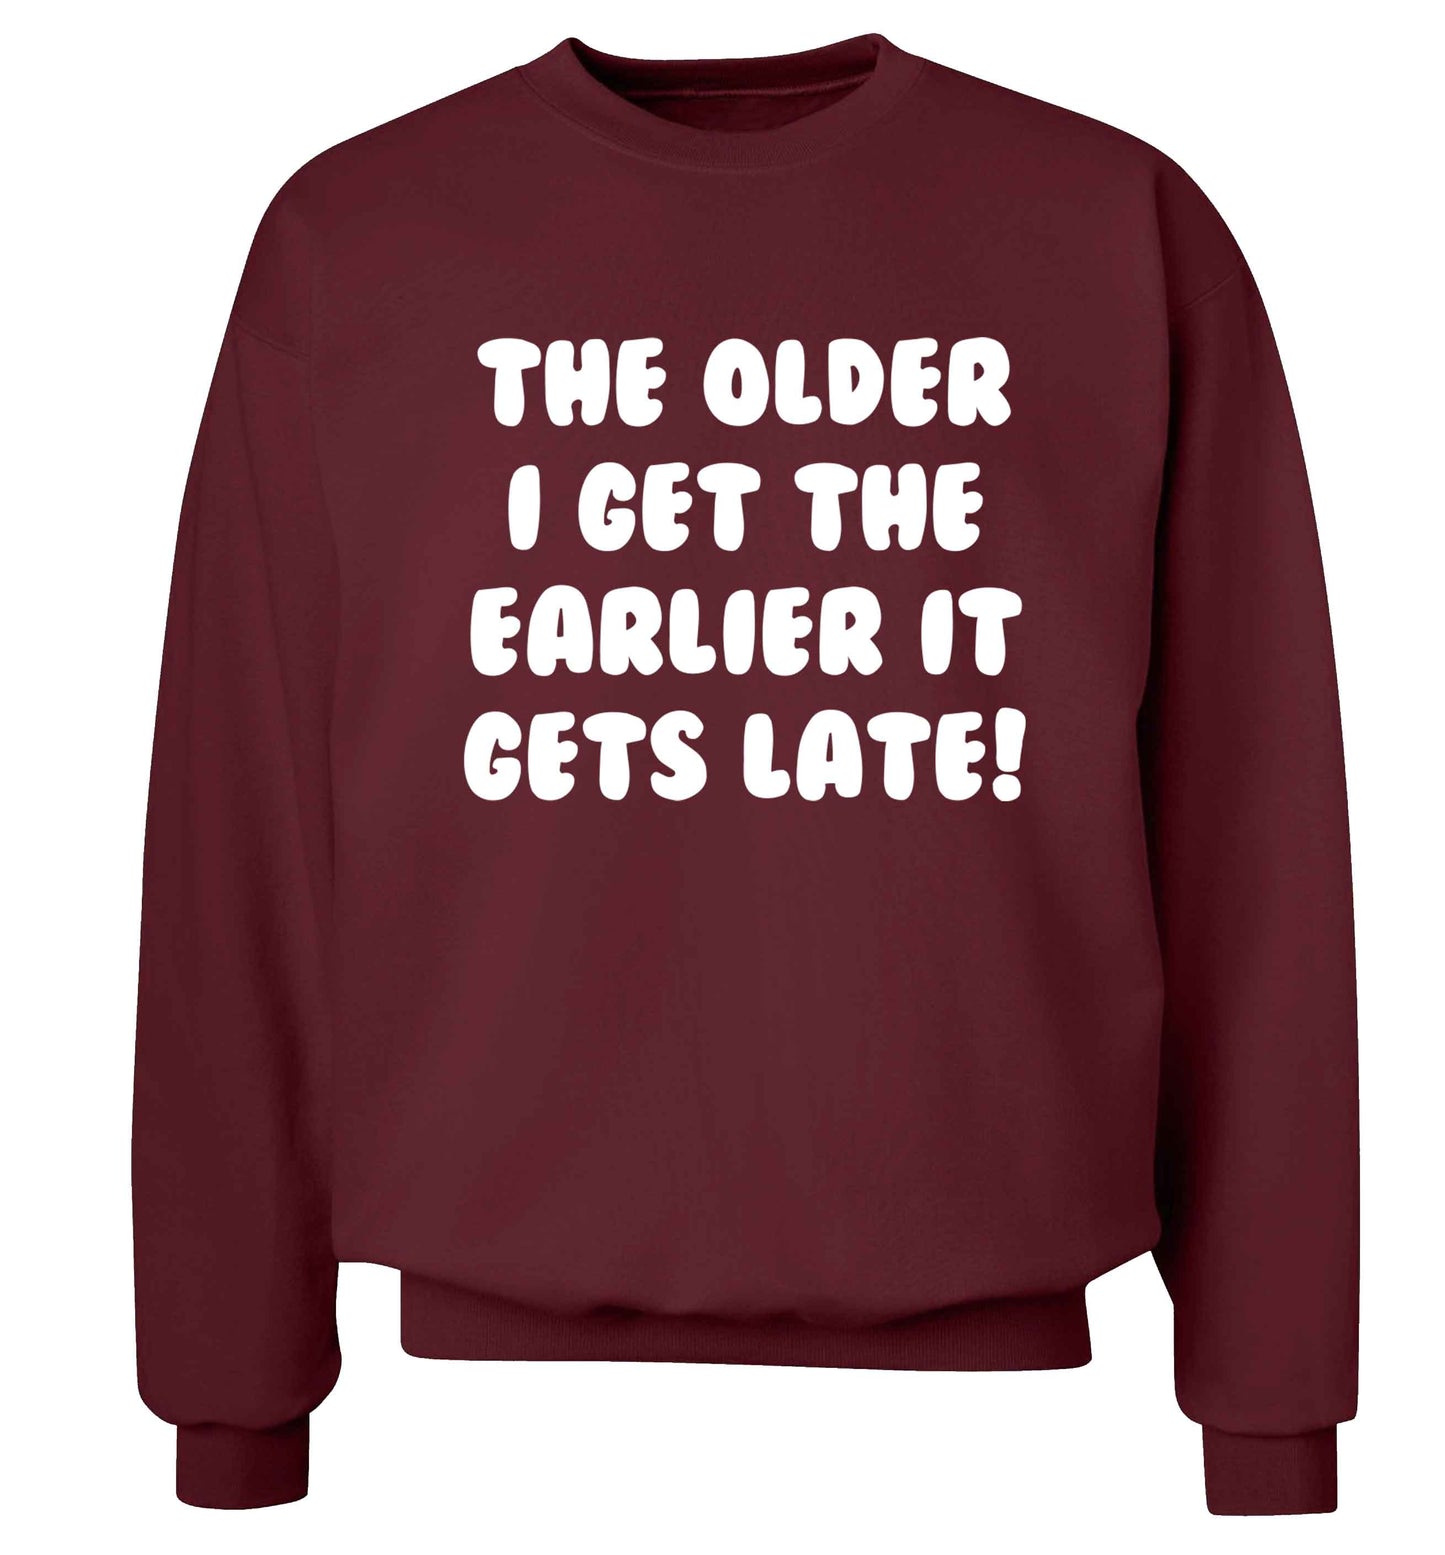 The older I get the earlier it gets late! Adult's unisex maroon Sweater 2XL